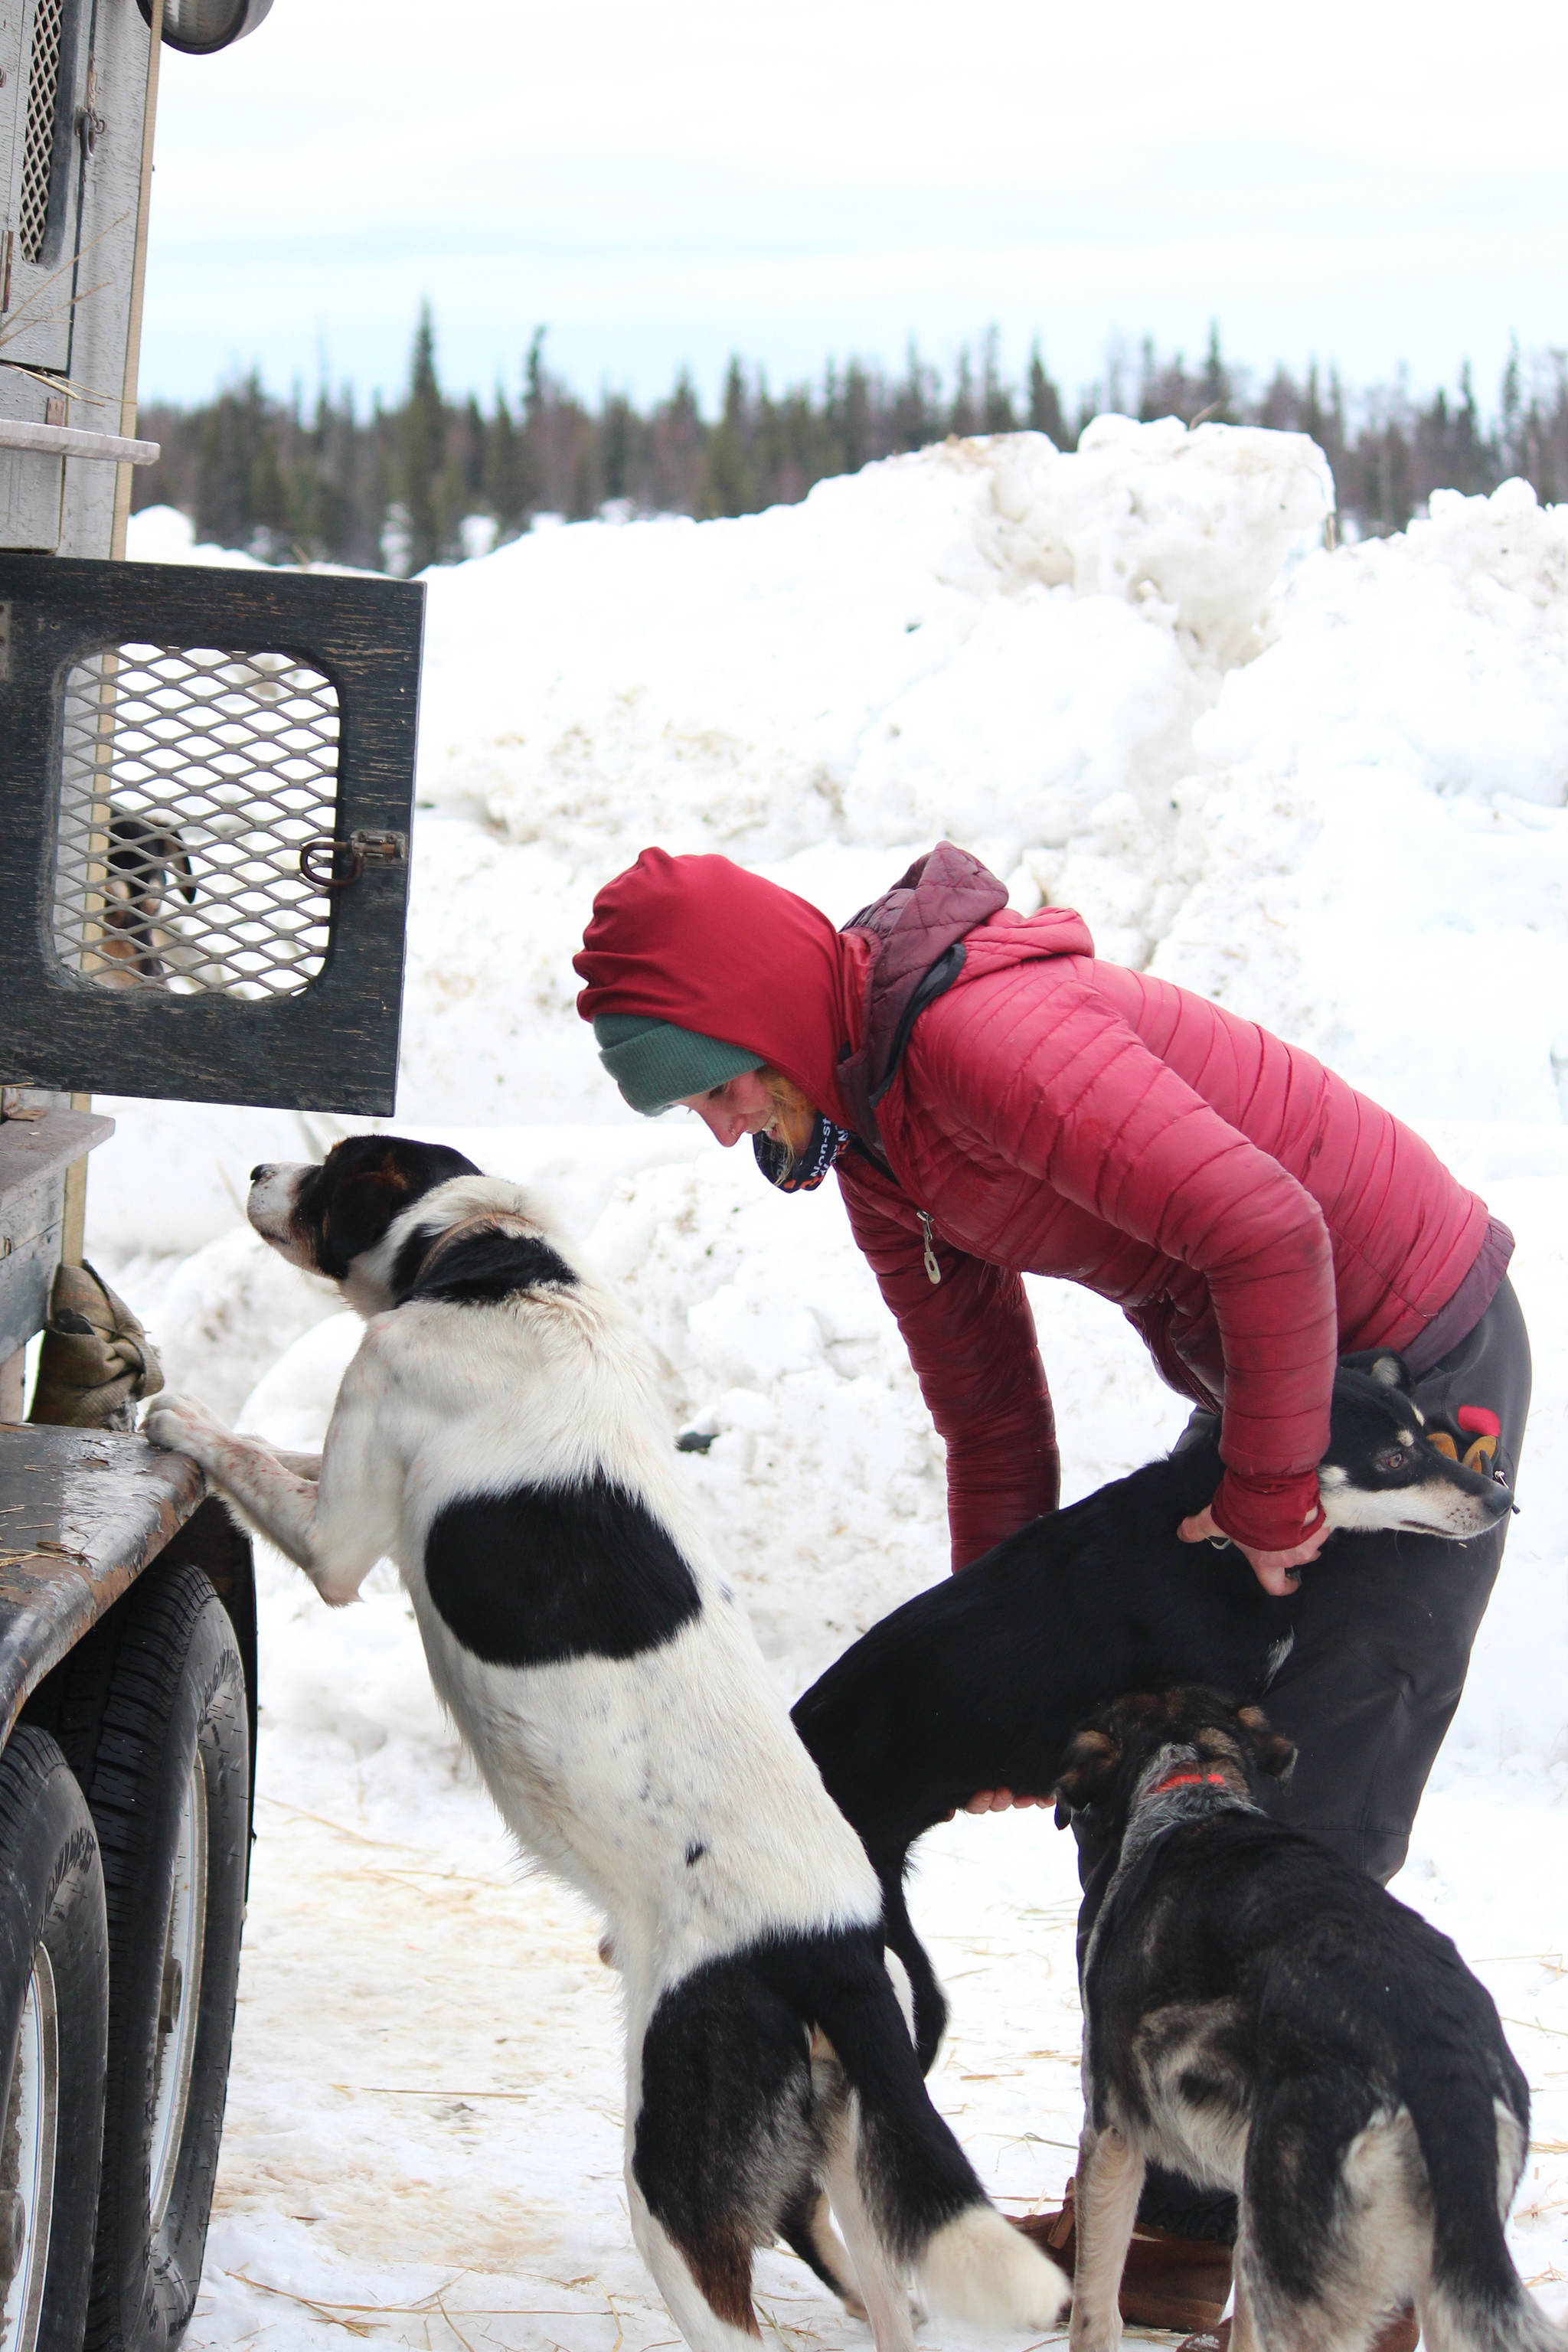 Musher Eli Campbell unloads a dog from a truck Sunday, Jan. 27, 2019 at Freddie’s Roadhouse near Ninilchik, Alaska, the start and finish line of this year’s Tustumena 200 Sled Dog Race. Campbell won the T100 race in 12 hours, 12 minutes, while her partner, Dave Turner, won the T200 this year after placing third in 2017 and 2018. (Photo by Megan Pacer/Homer News)